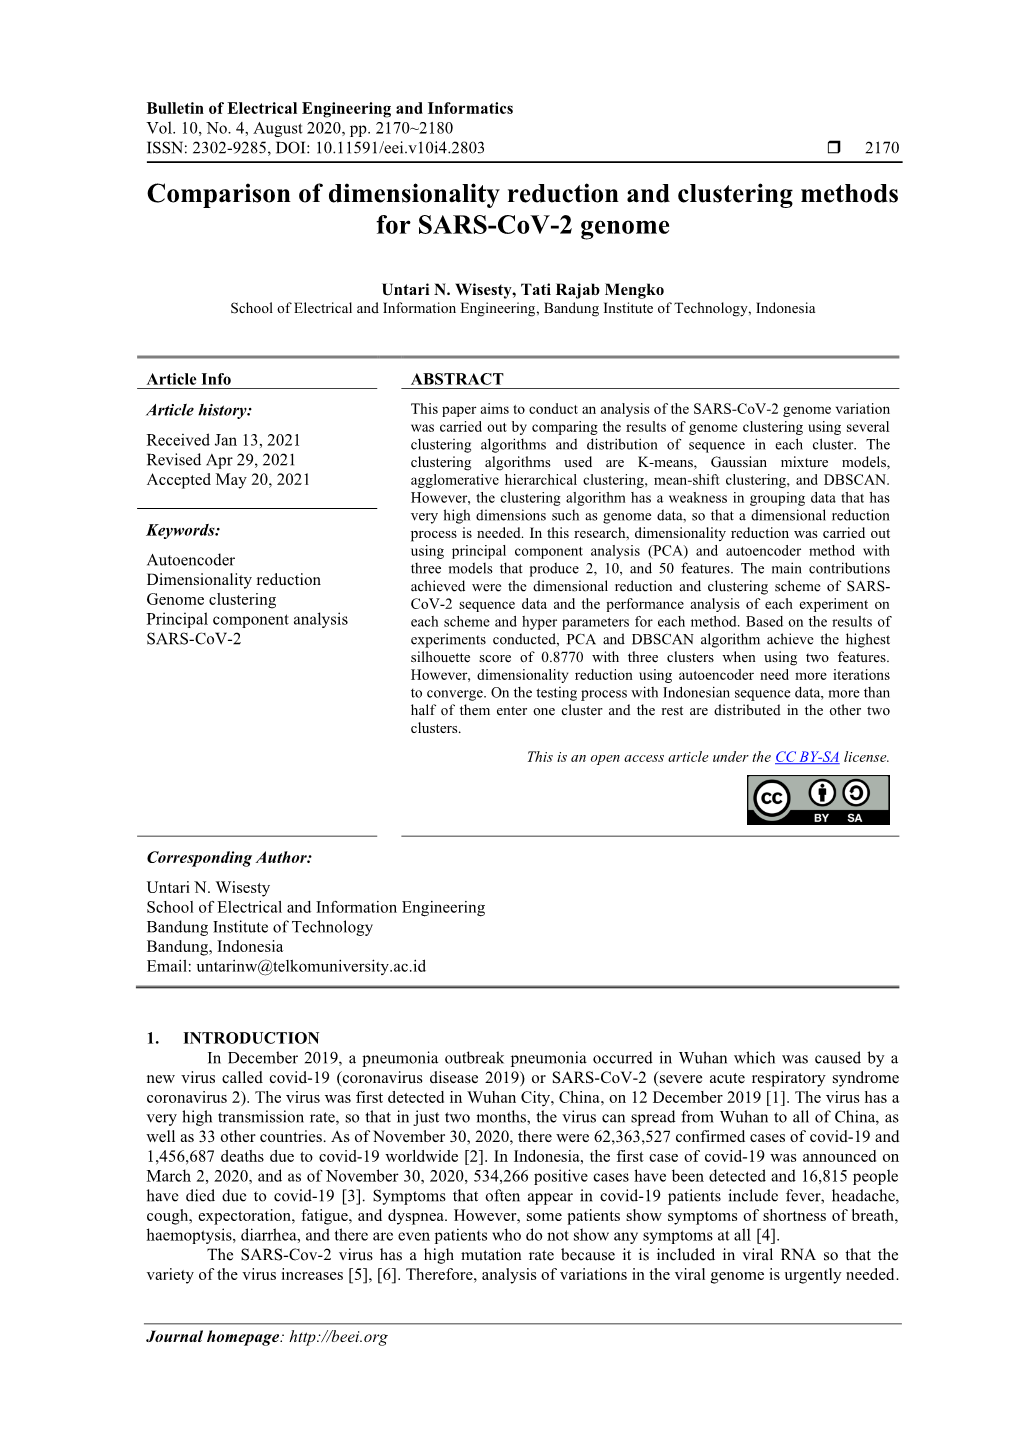 Comparison of Dimensionality Reduction and Clustering Methods for SARS-Cov-2 Genome